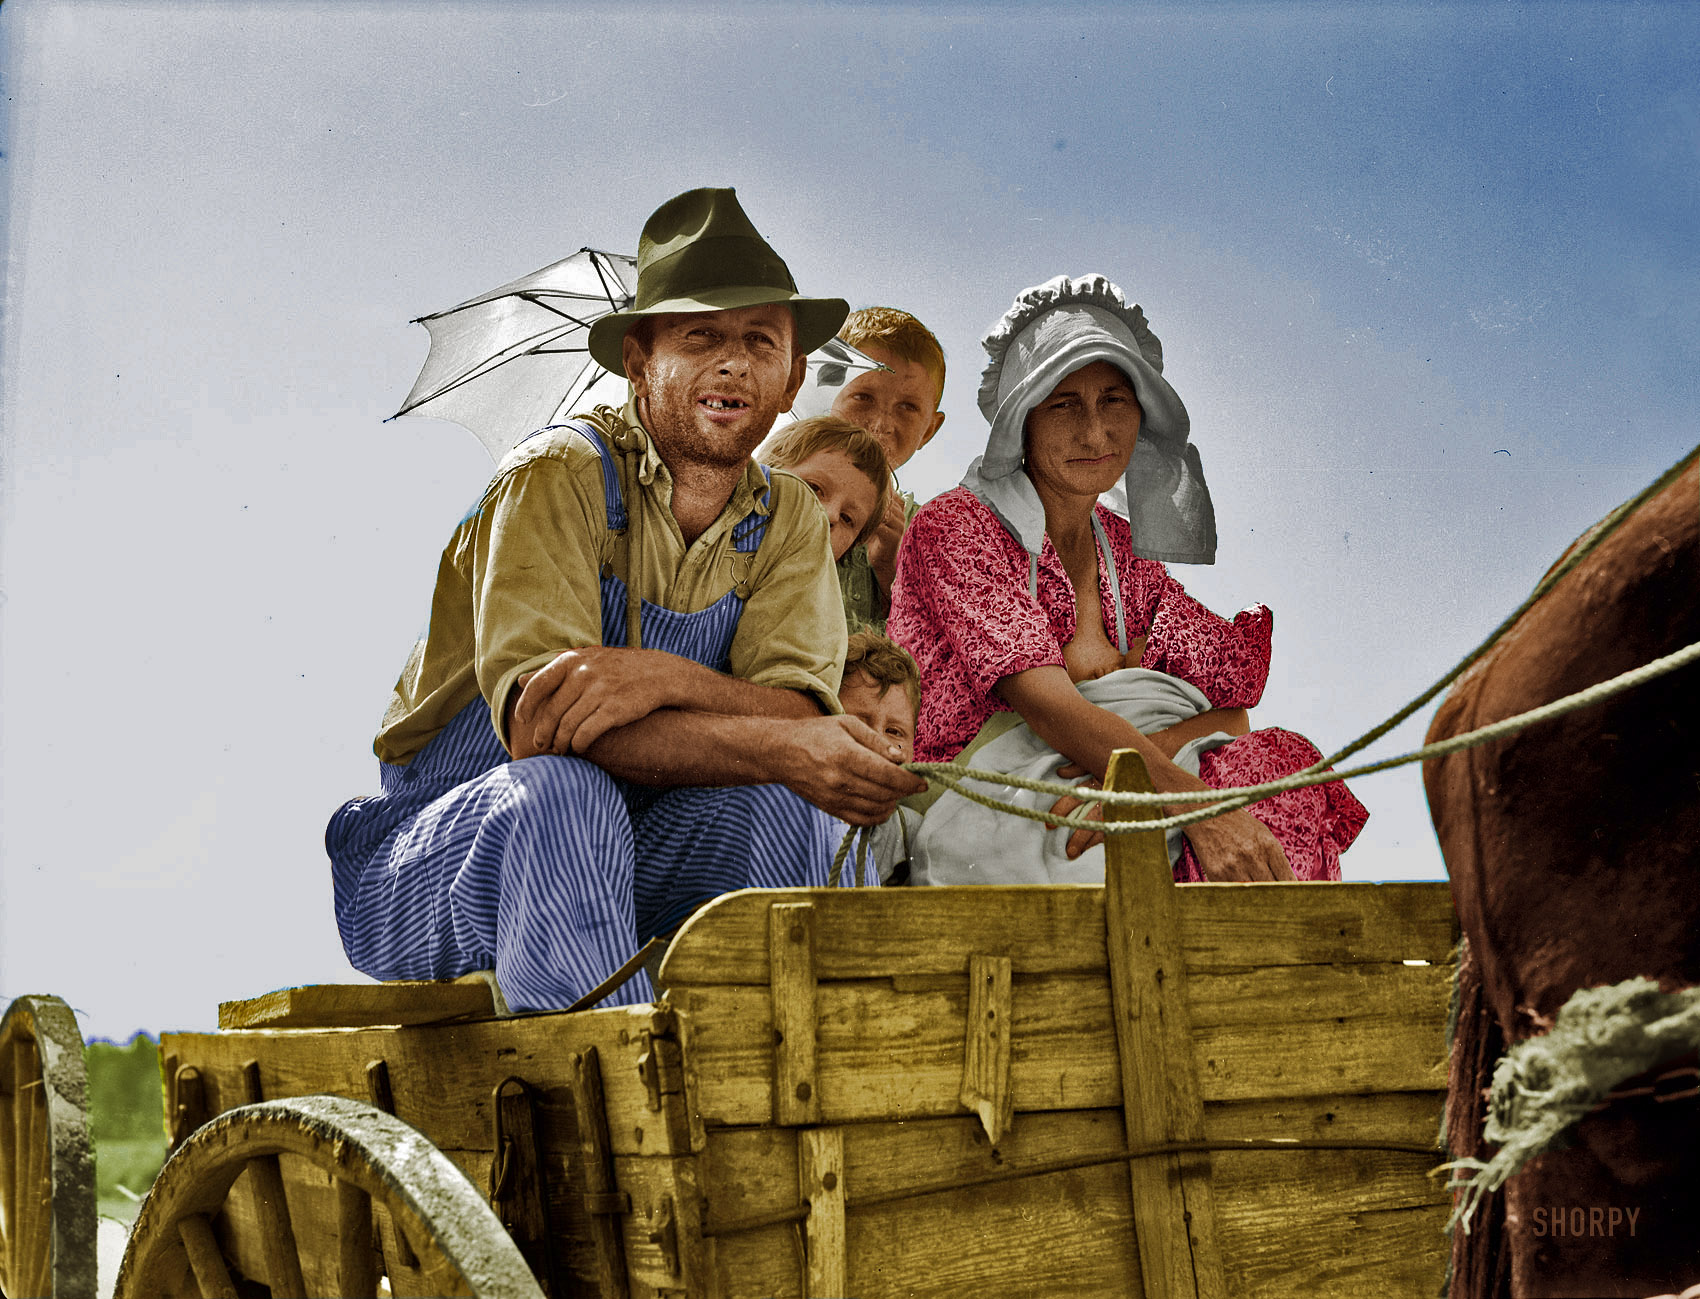 Colorized version of Minivan 1937. They look a lot better off in color. View full size.